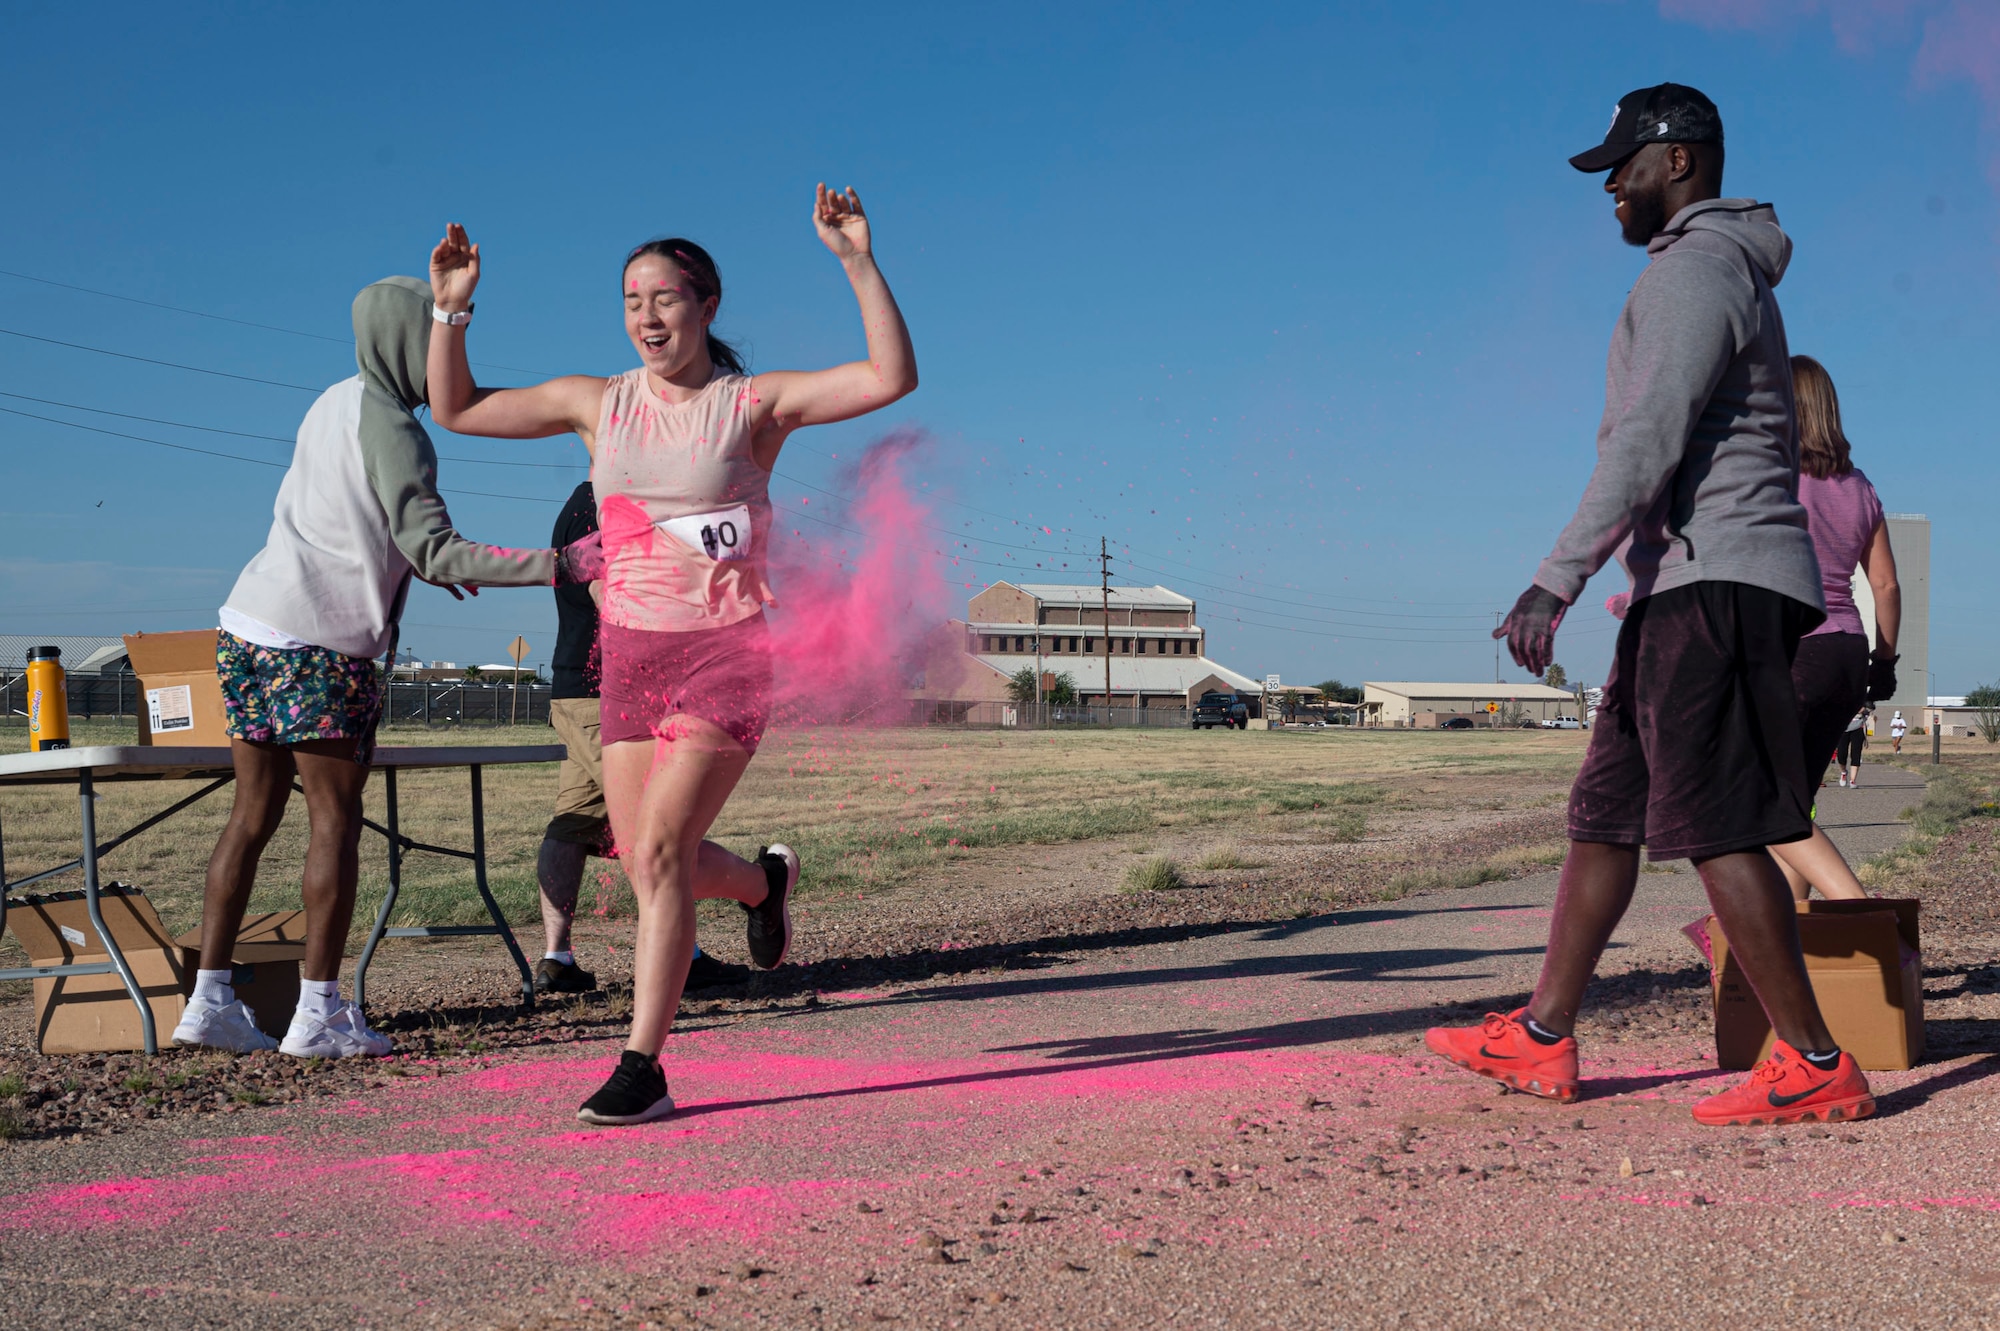 Pictured above is a woman running trough a cloud of pink smoke.